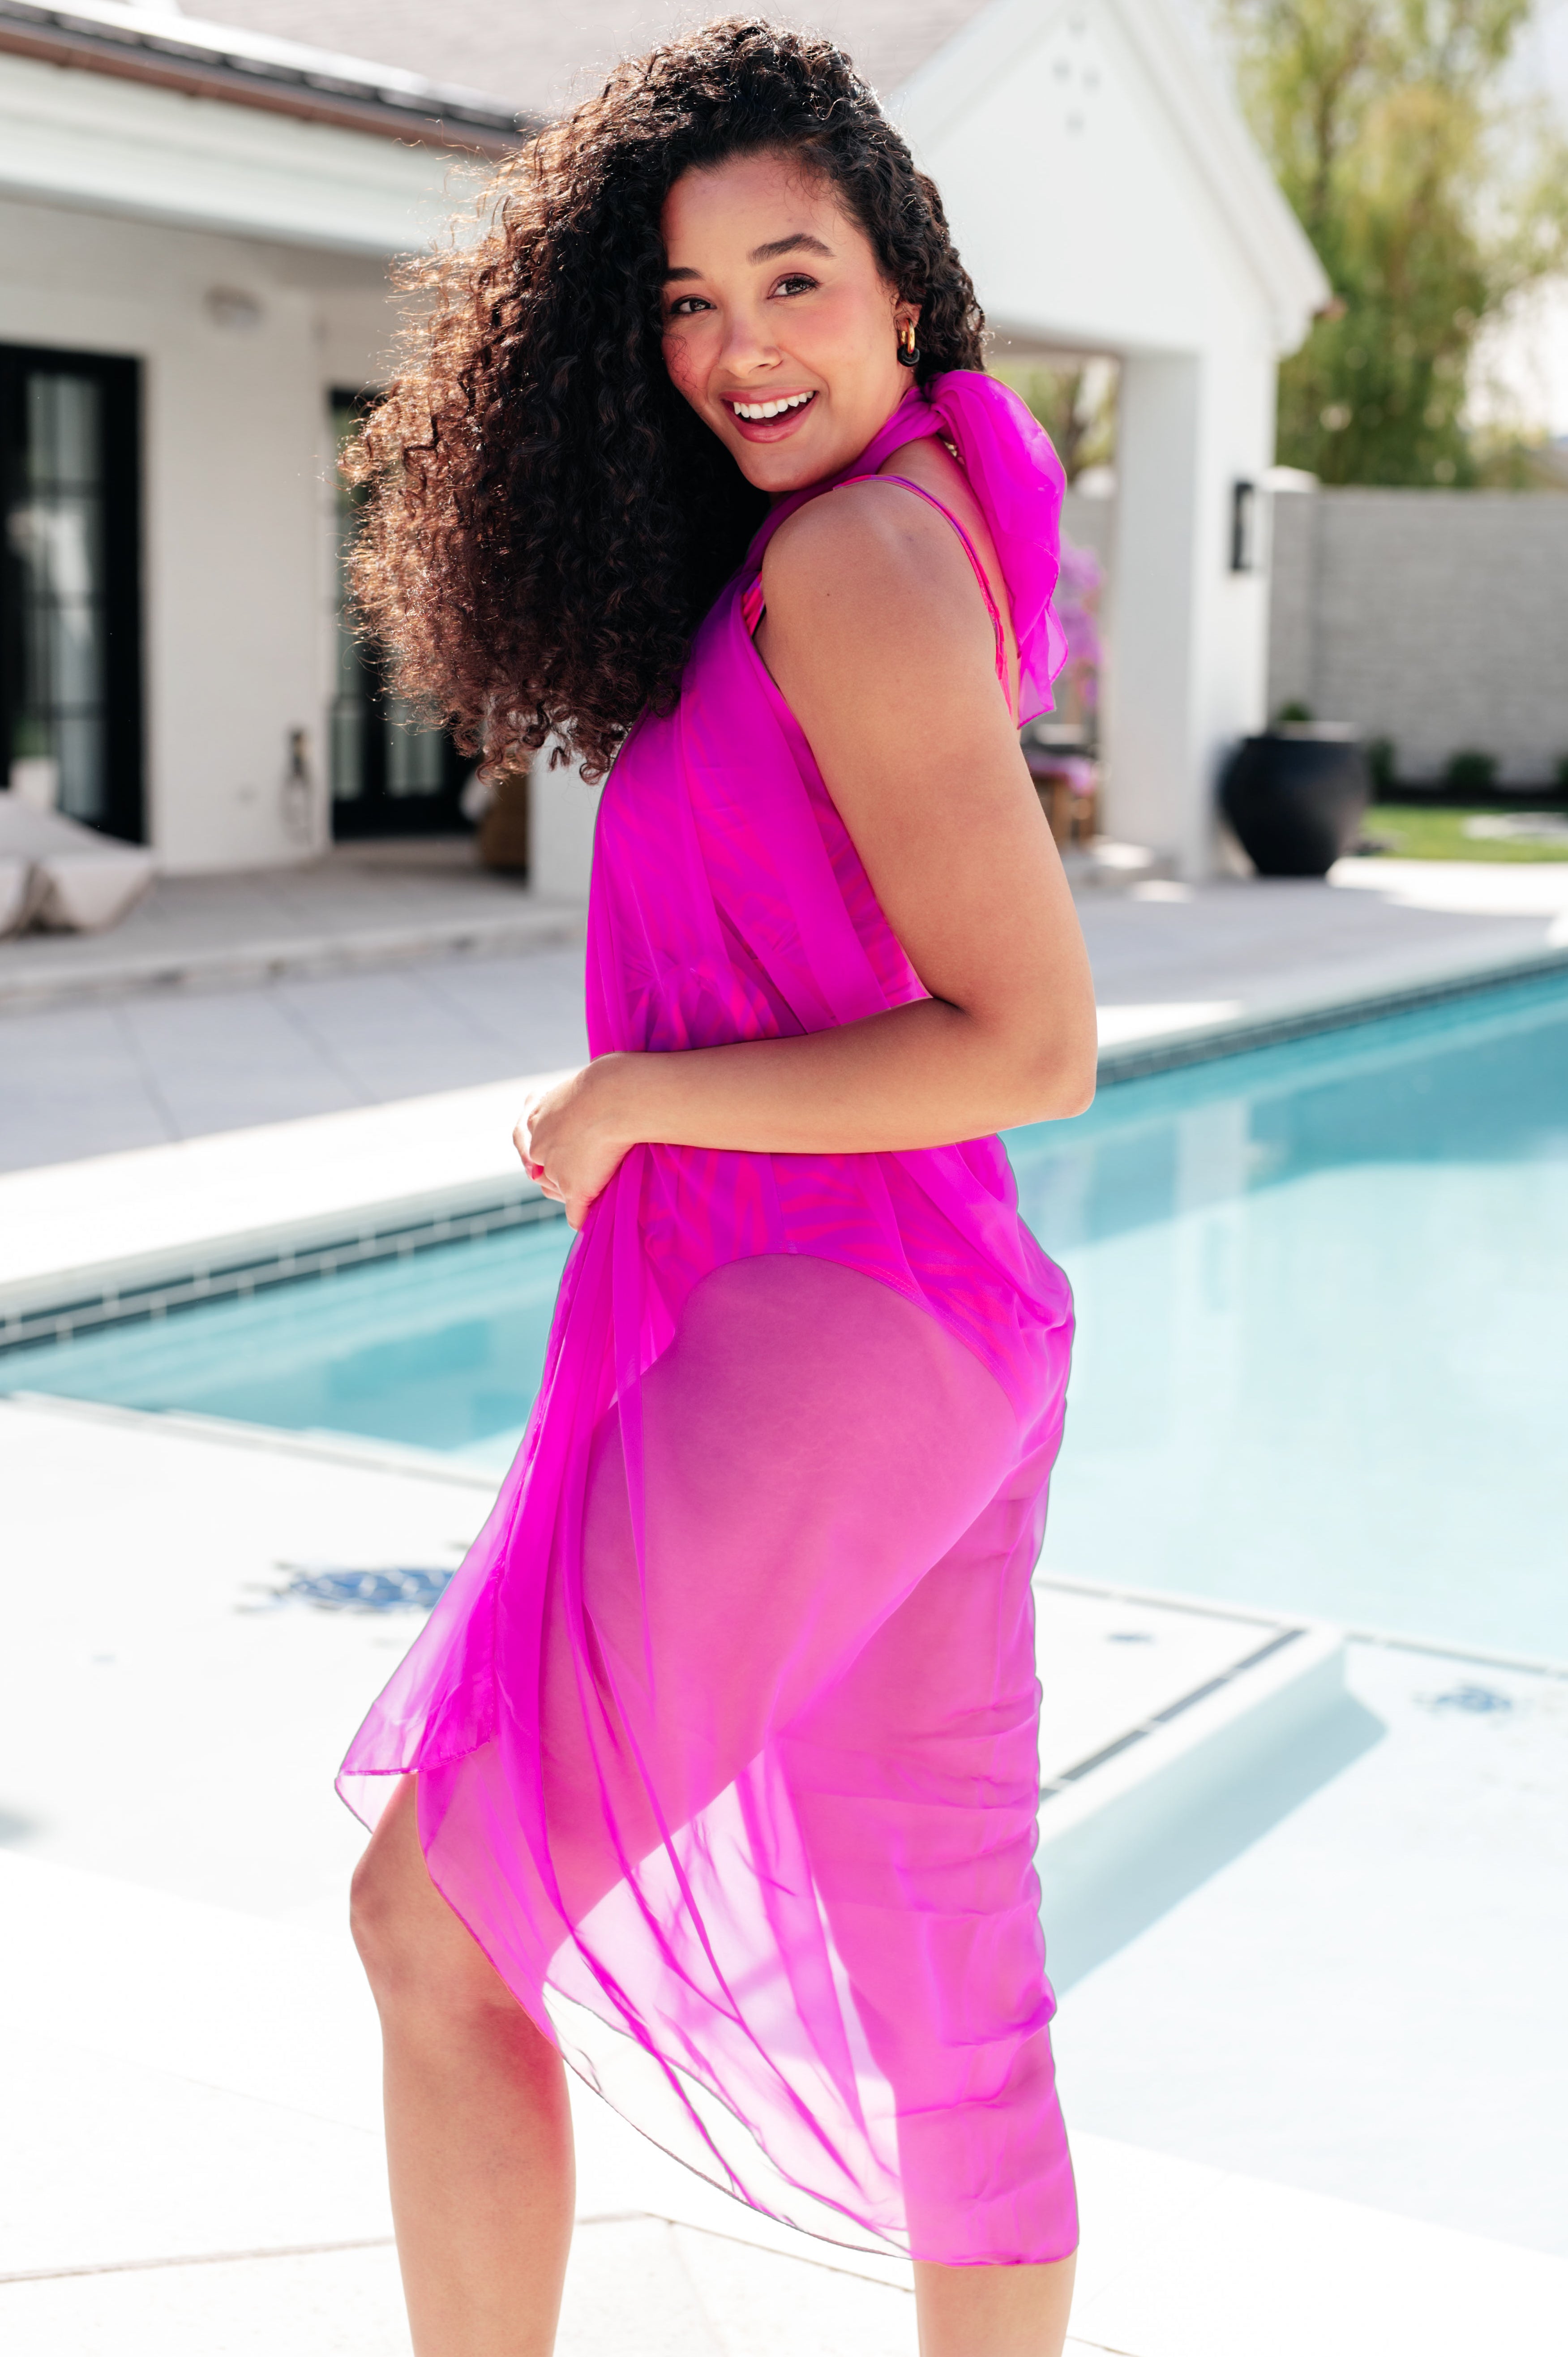 Wrapped In Summer Versatile Hot Pink Swim Cover-up